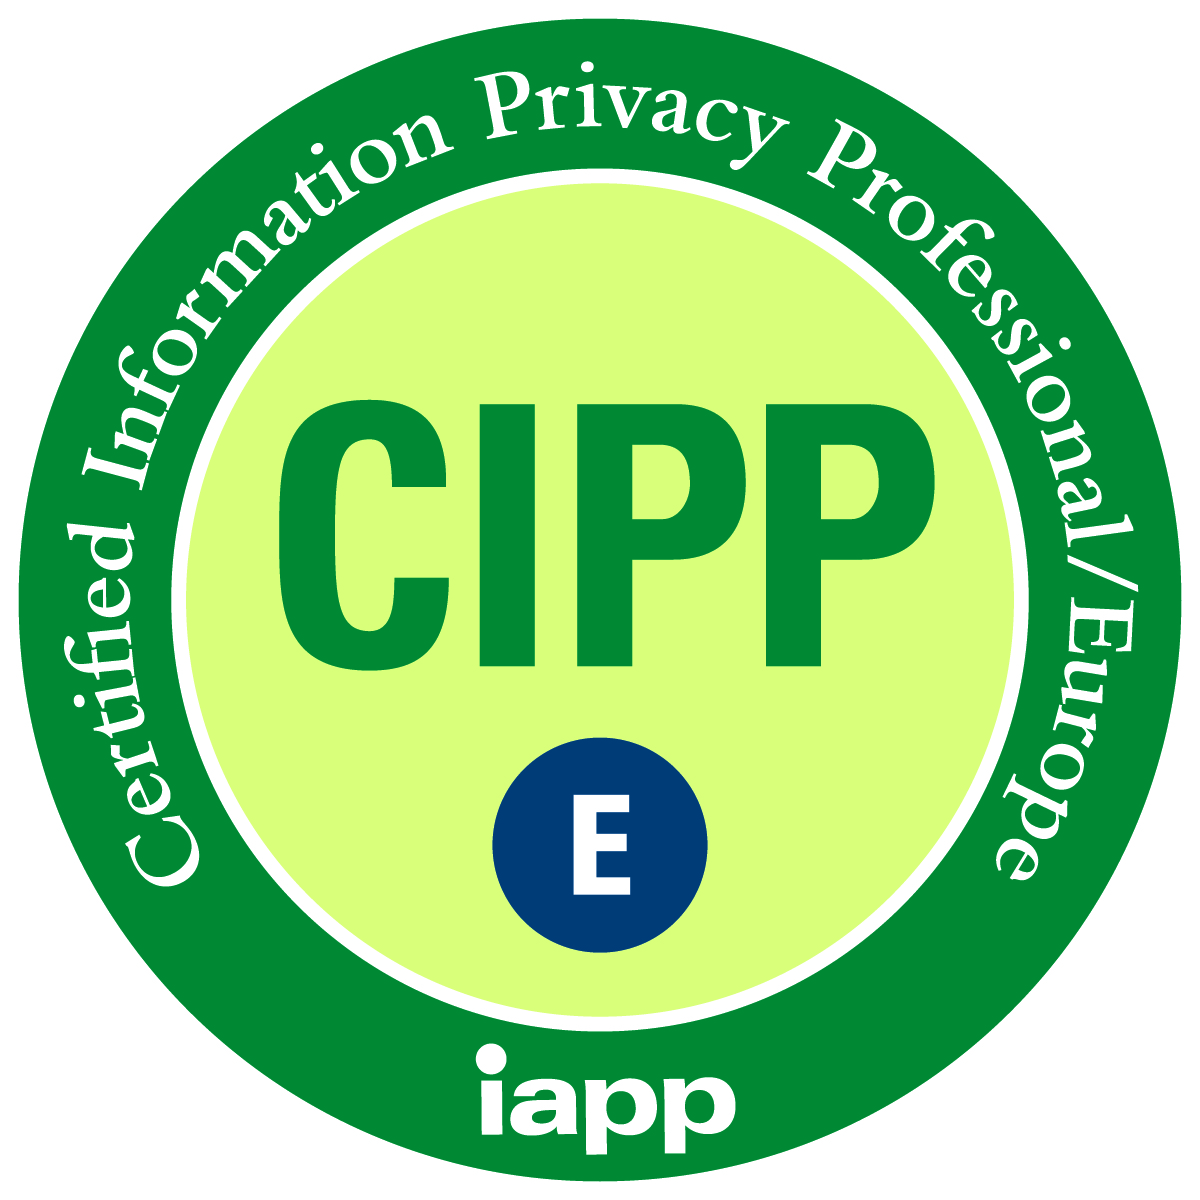 Certified Information Privacy Professional/Europe (CIPP/E) - Training only